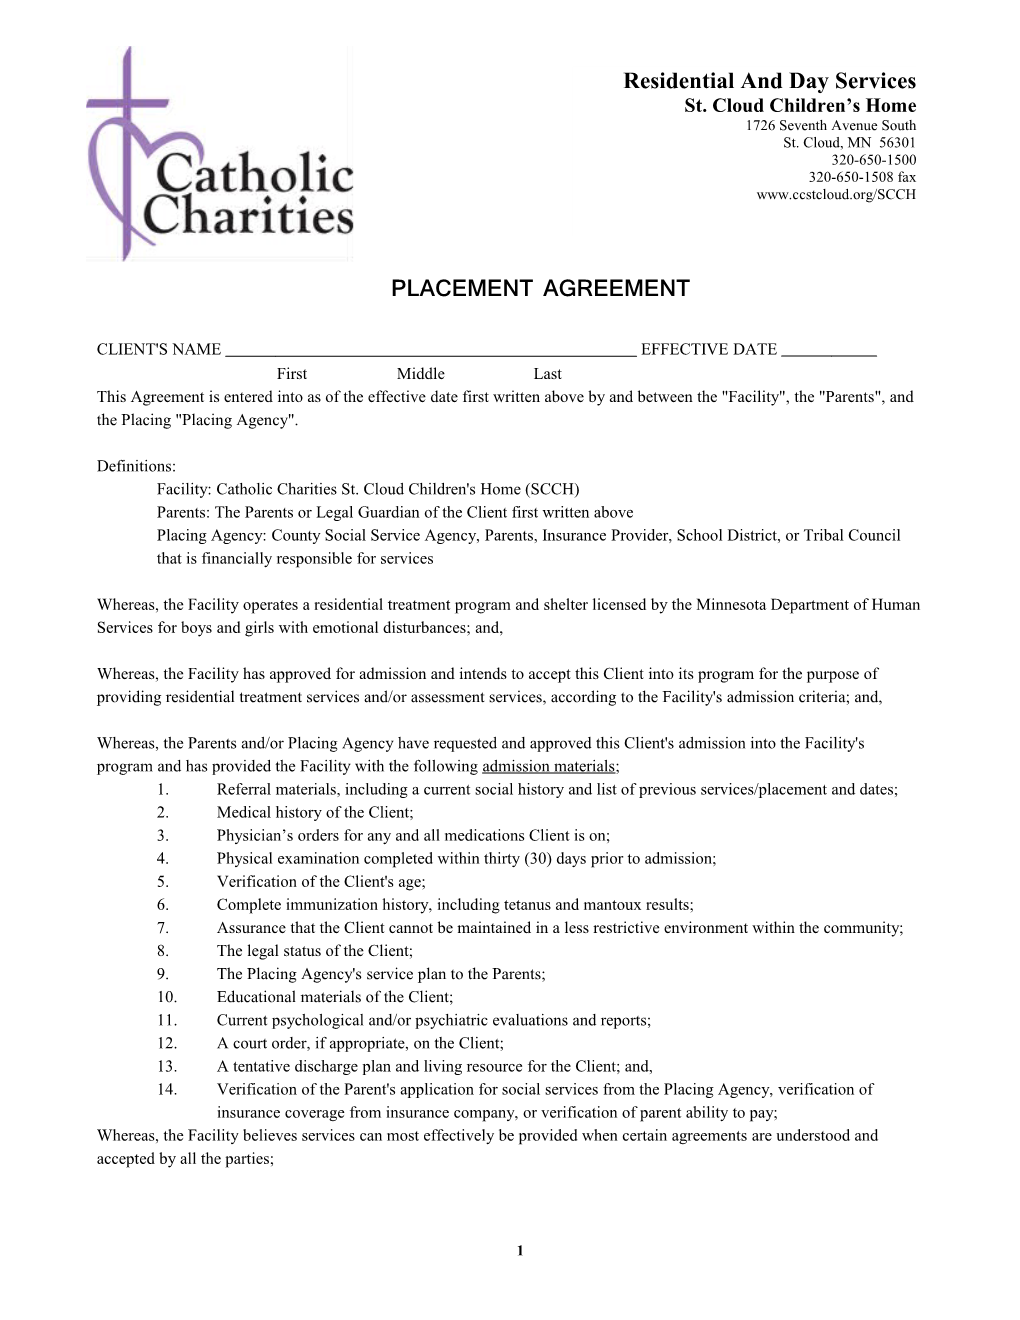 Placement Agreement s1